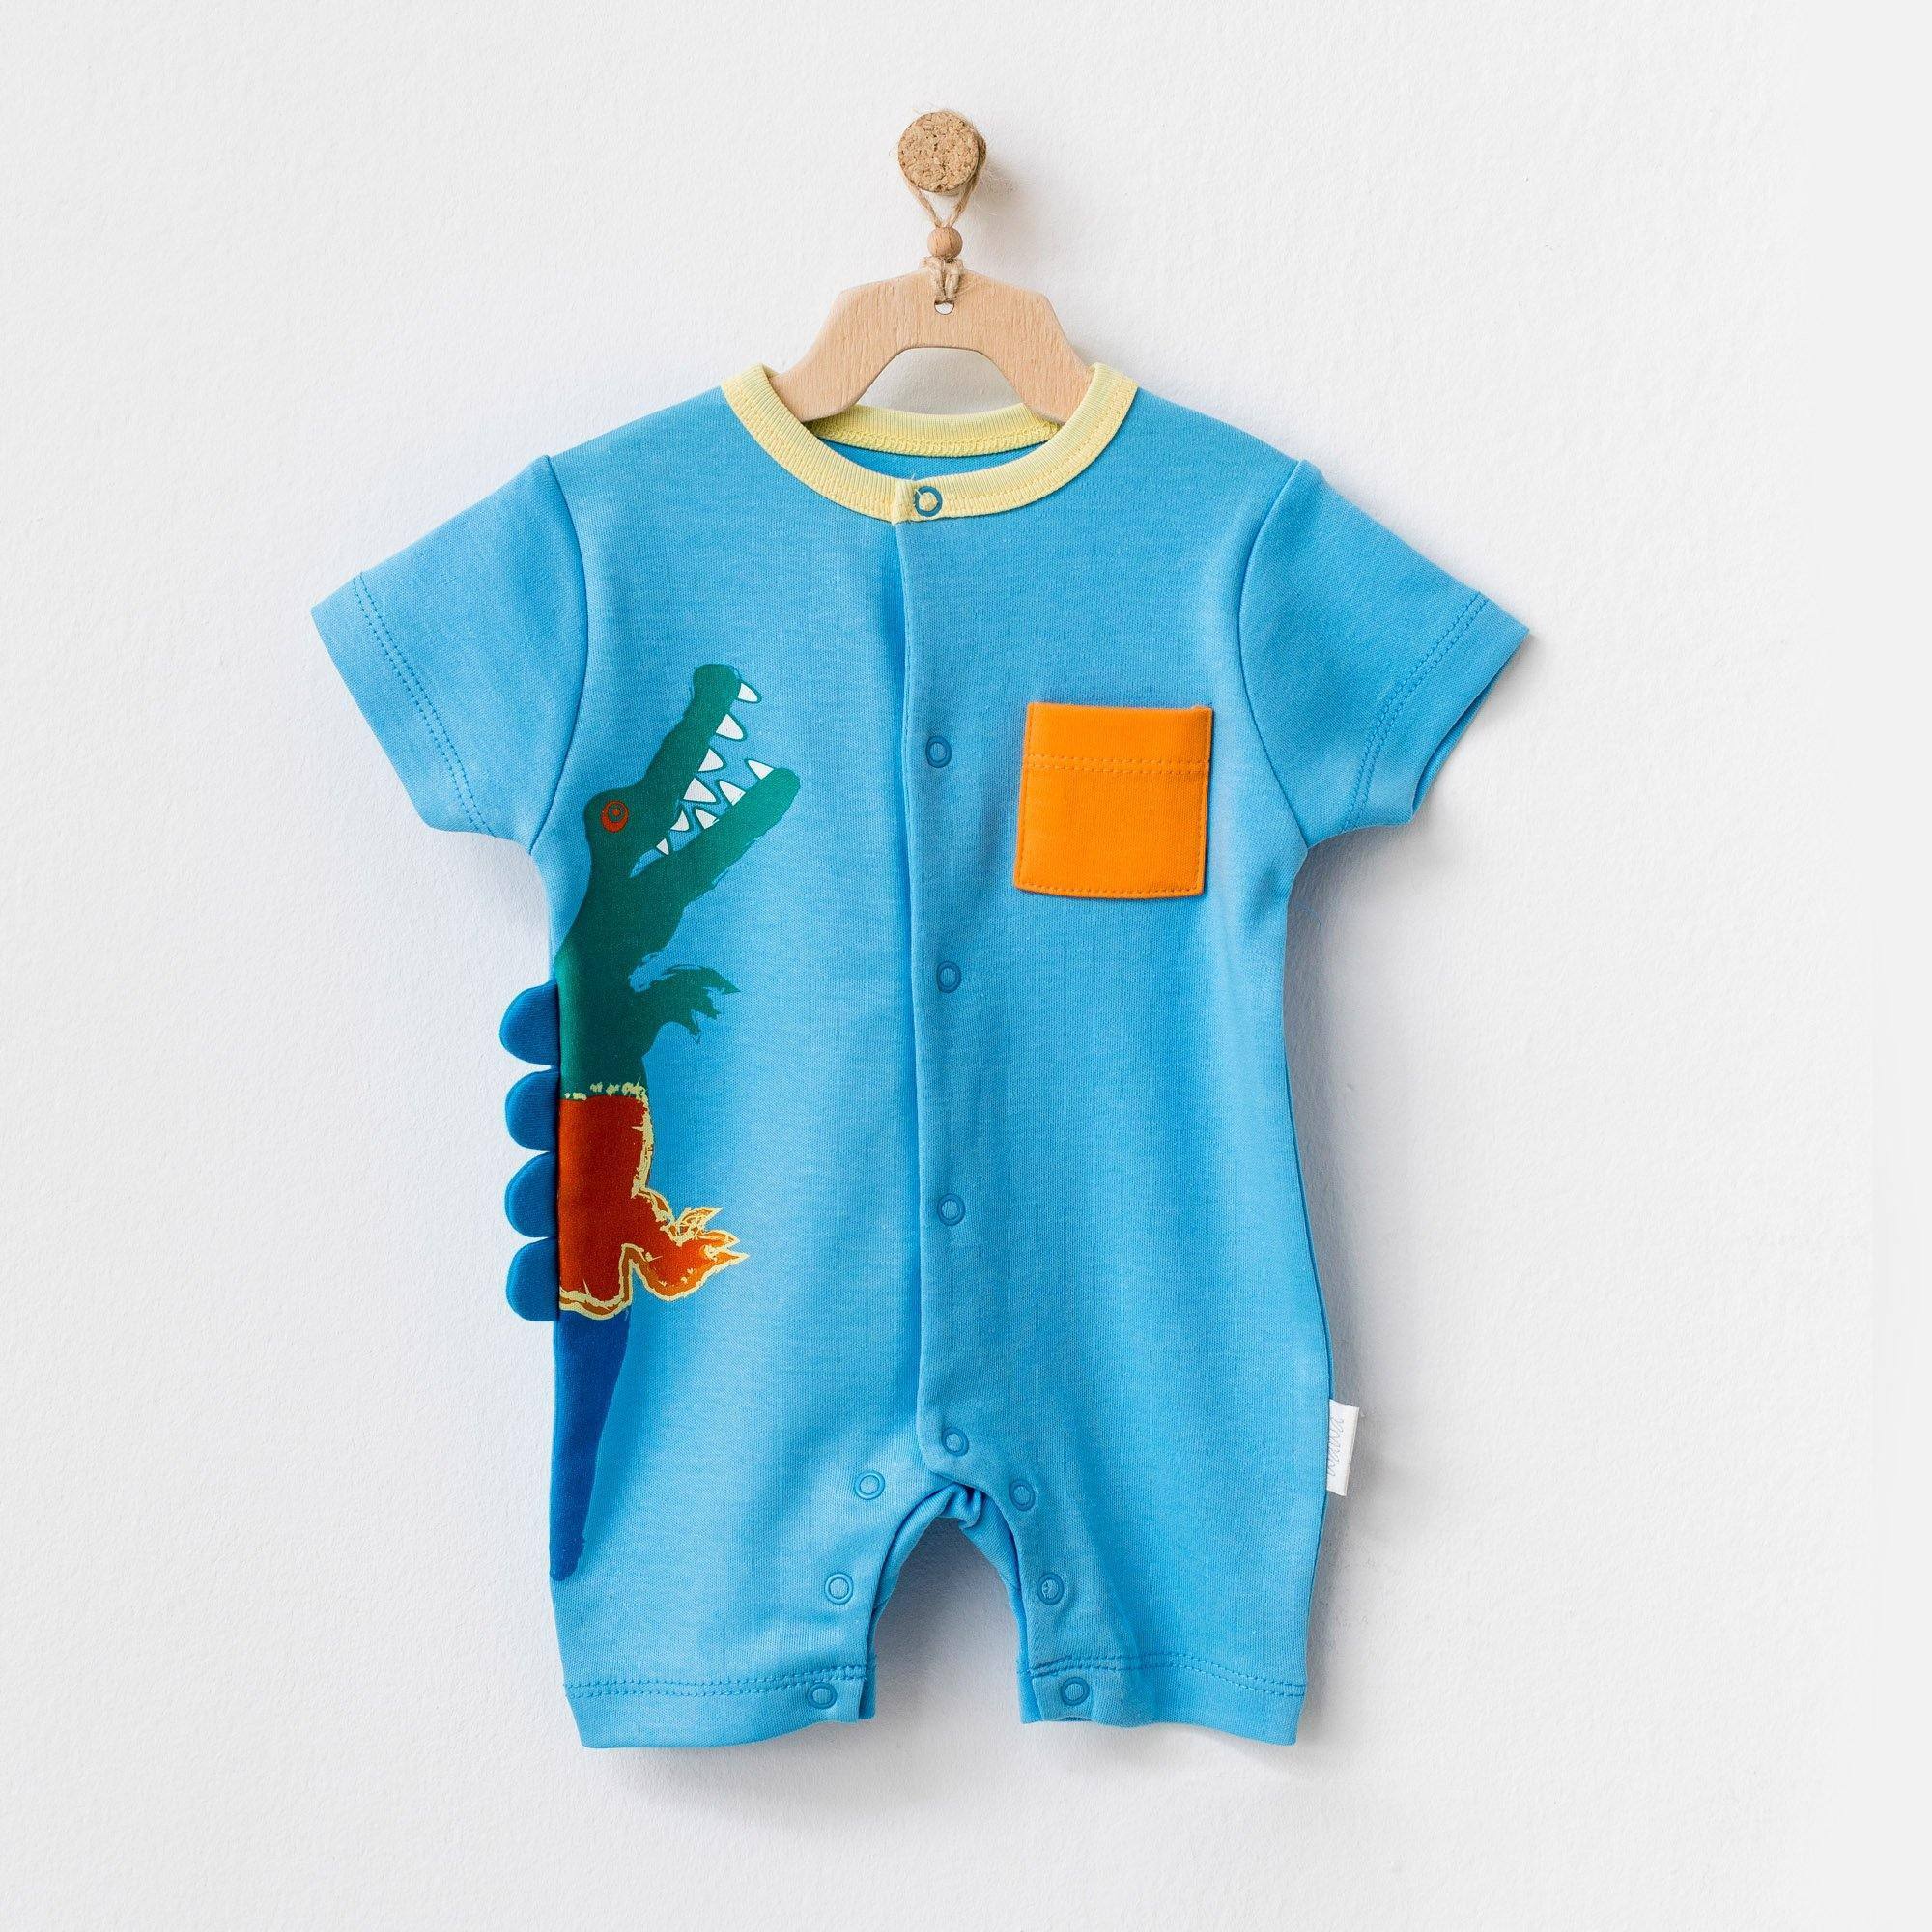 Play Time - Baby Boy Romper - Play Time - Baby Boy Romper - 1-3 Months - Andywawa - Melymod